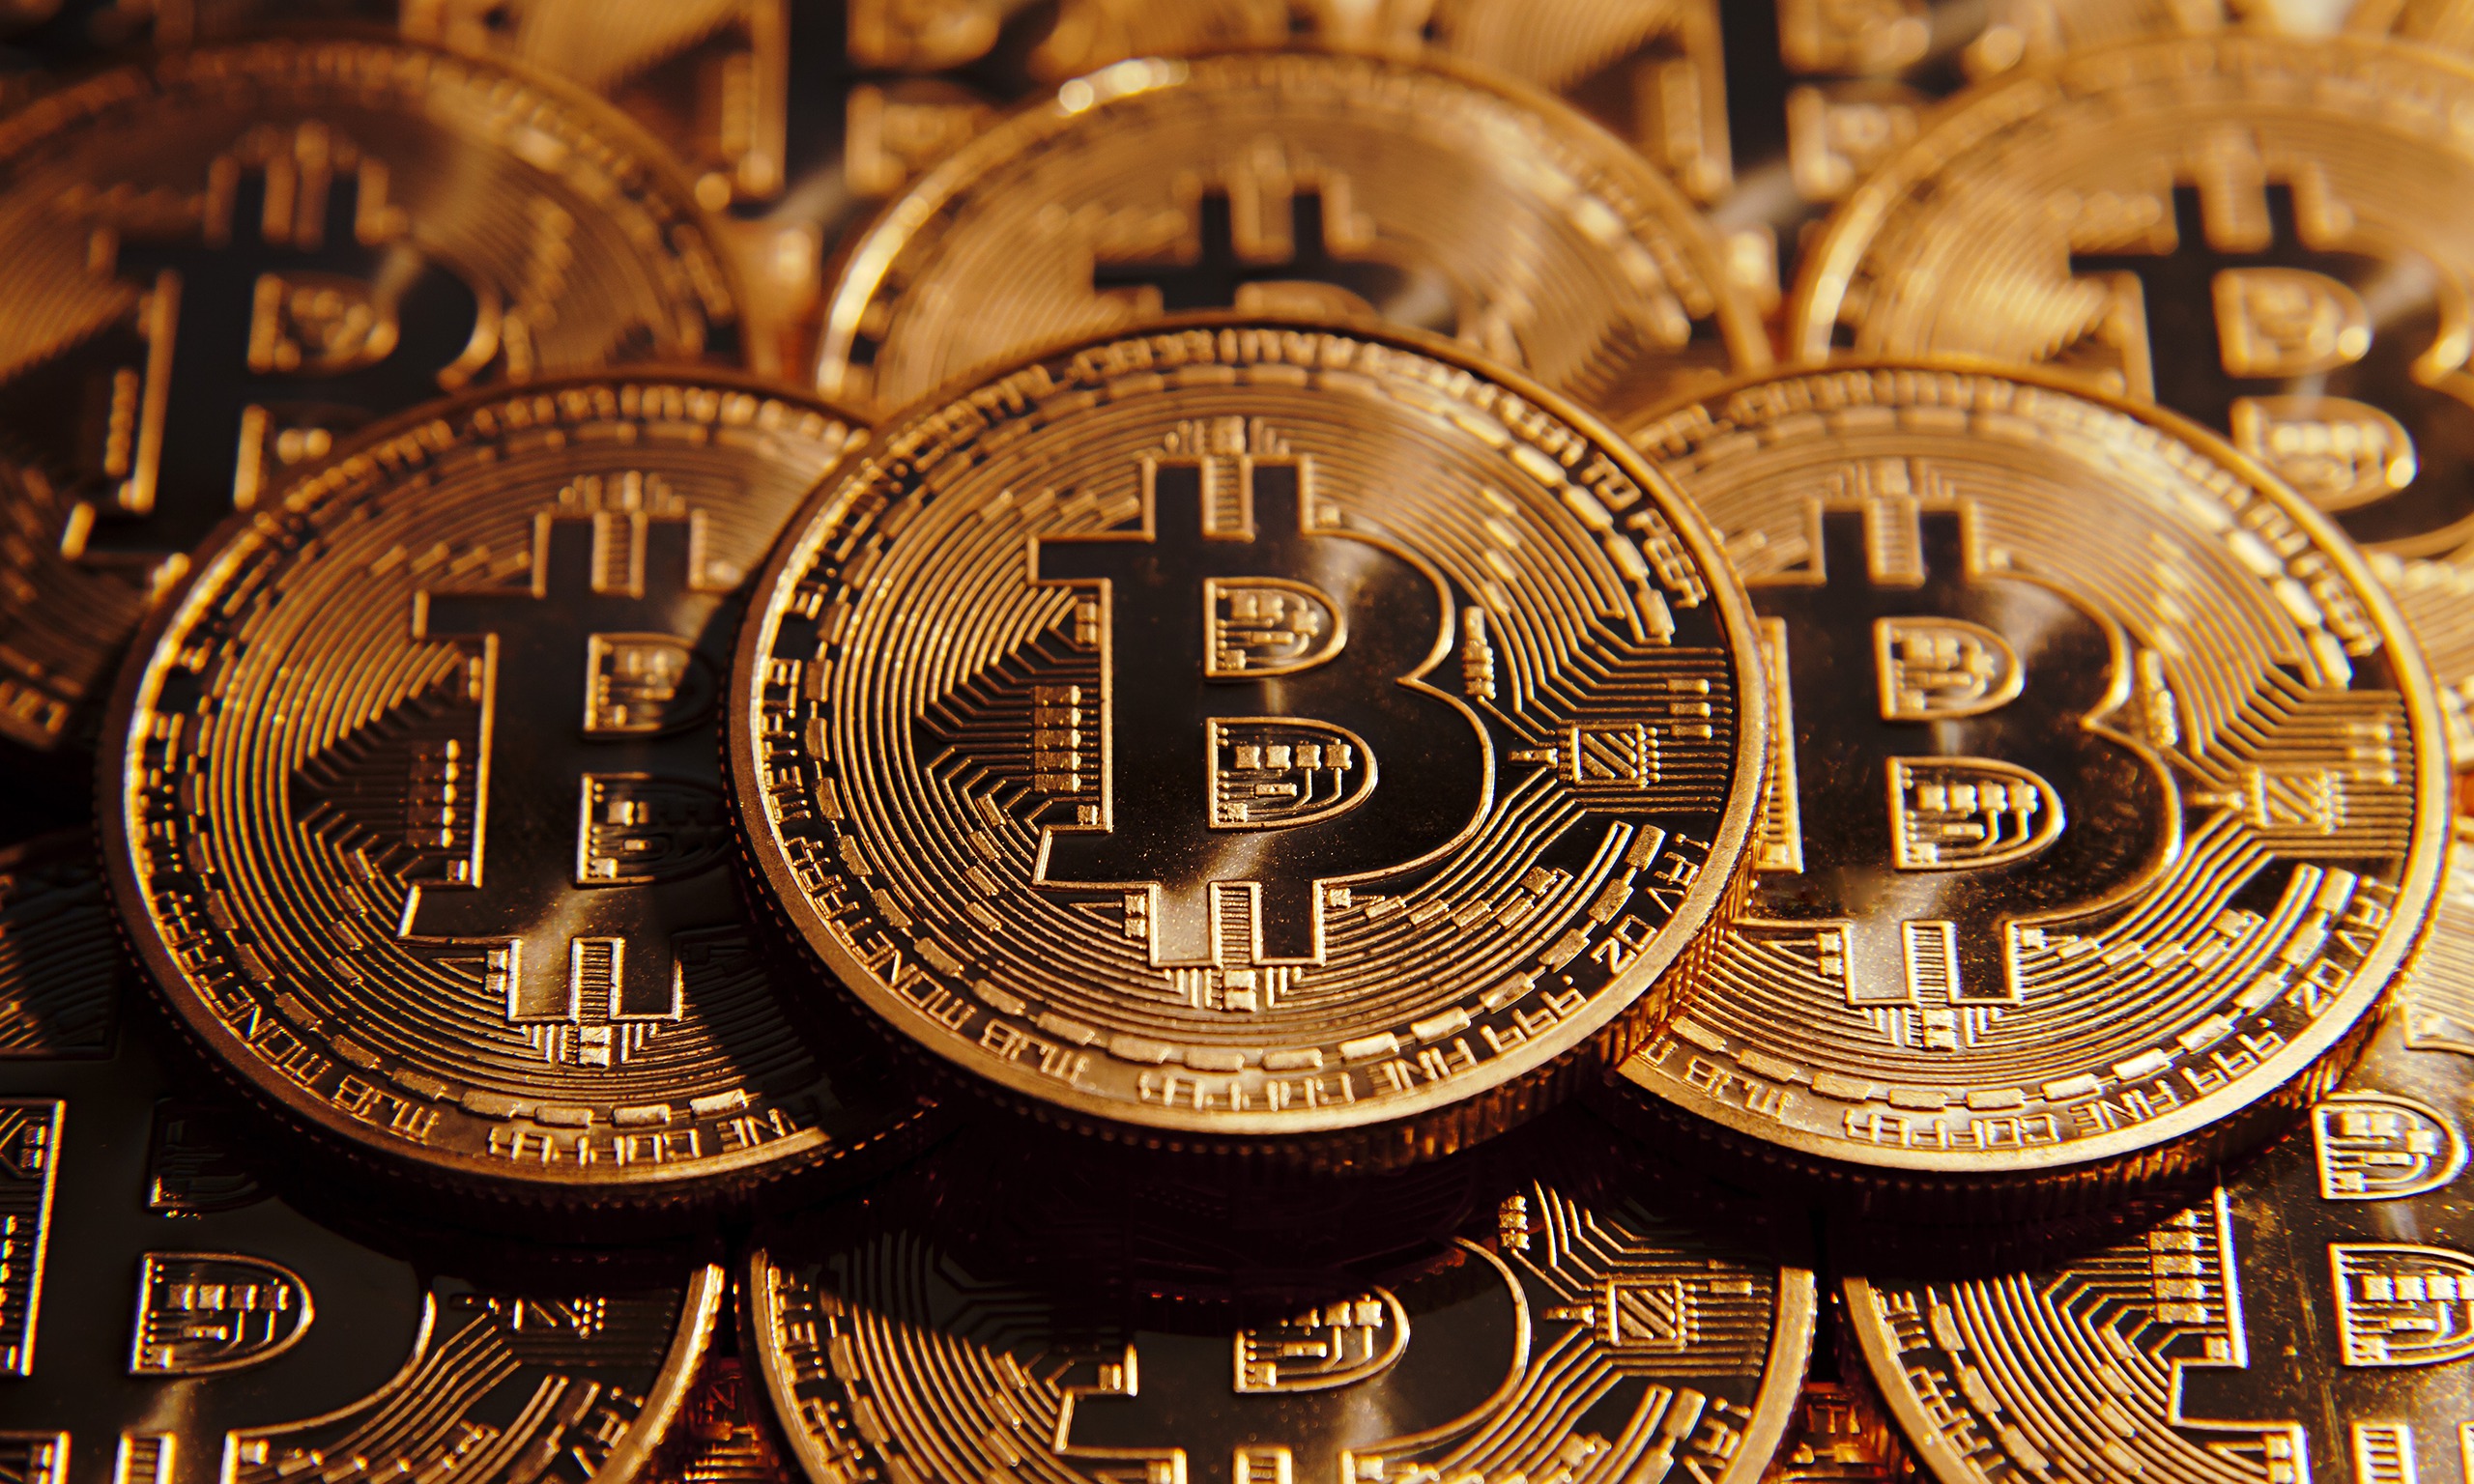 Bitcoin: What’s behind the gold rush?